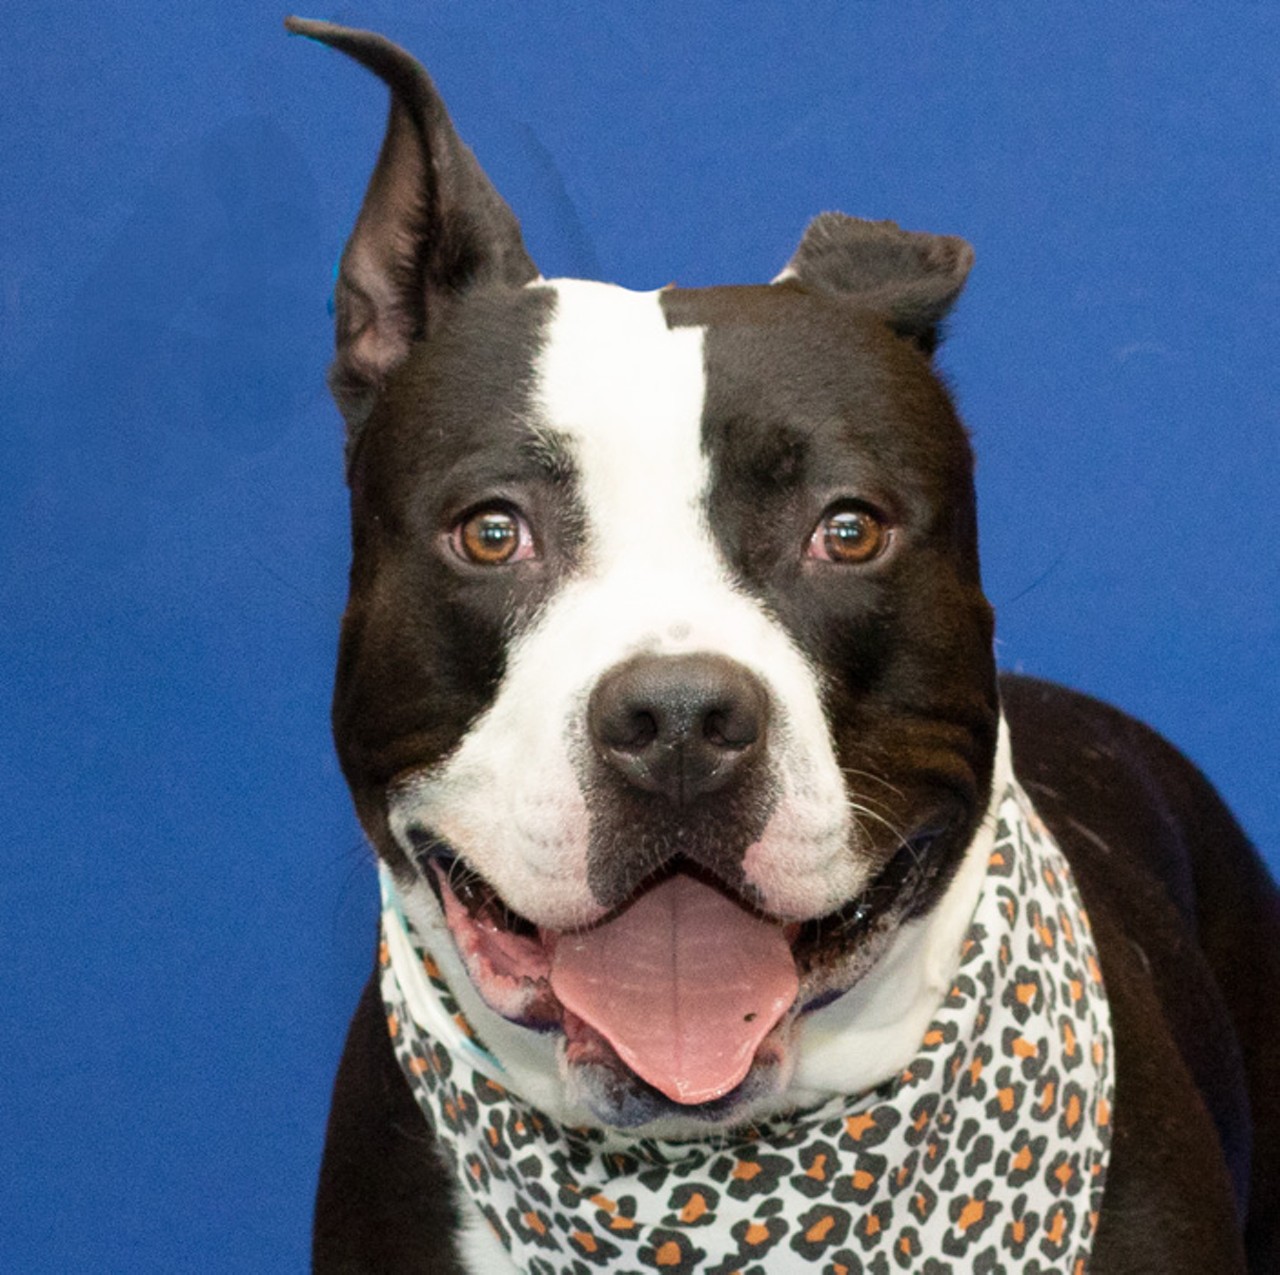 NAME: Buster
GENDER: Male
BREED: Pit Bull
AGE: 1 years, 6 months
WEIGHT: 83 pounds
SPECIAL CONSIDERATIONS: None
REASON I CAME TO MHS: Owner surrender
LOCATION: Berman Center for Animal Care
ID NUMBER: 869468